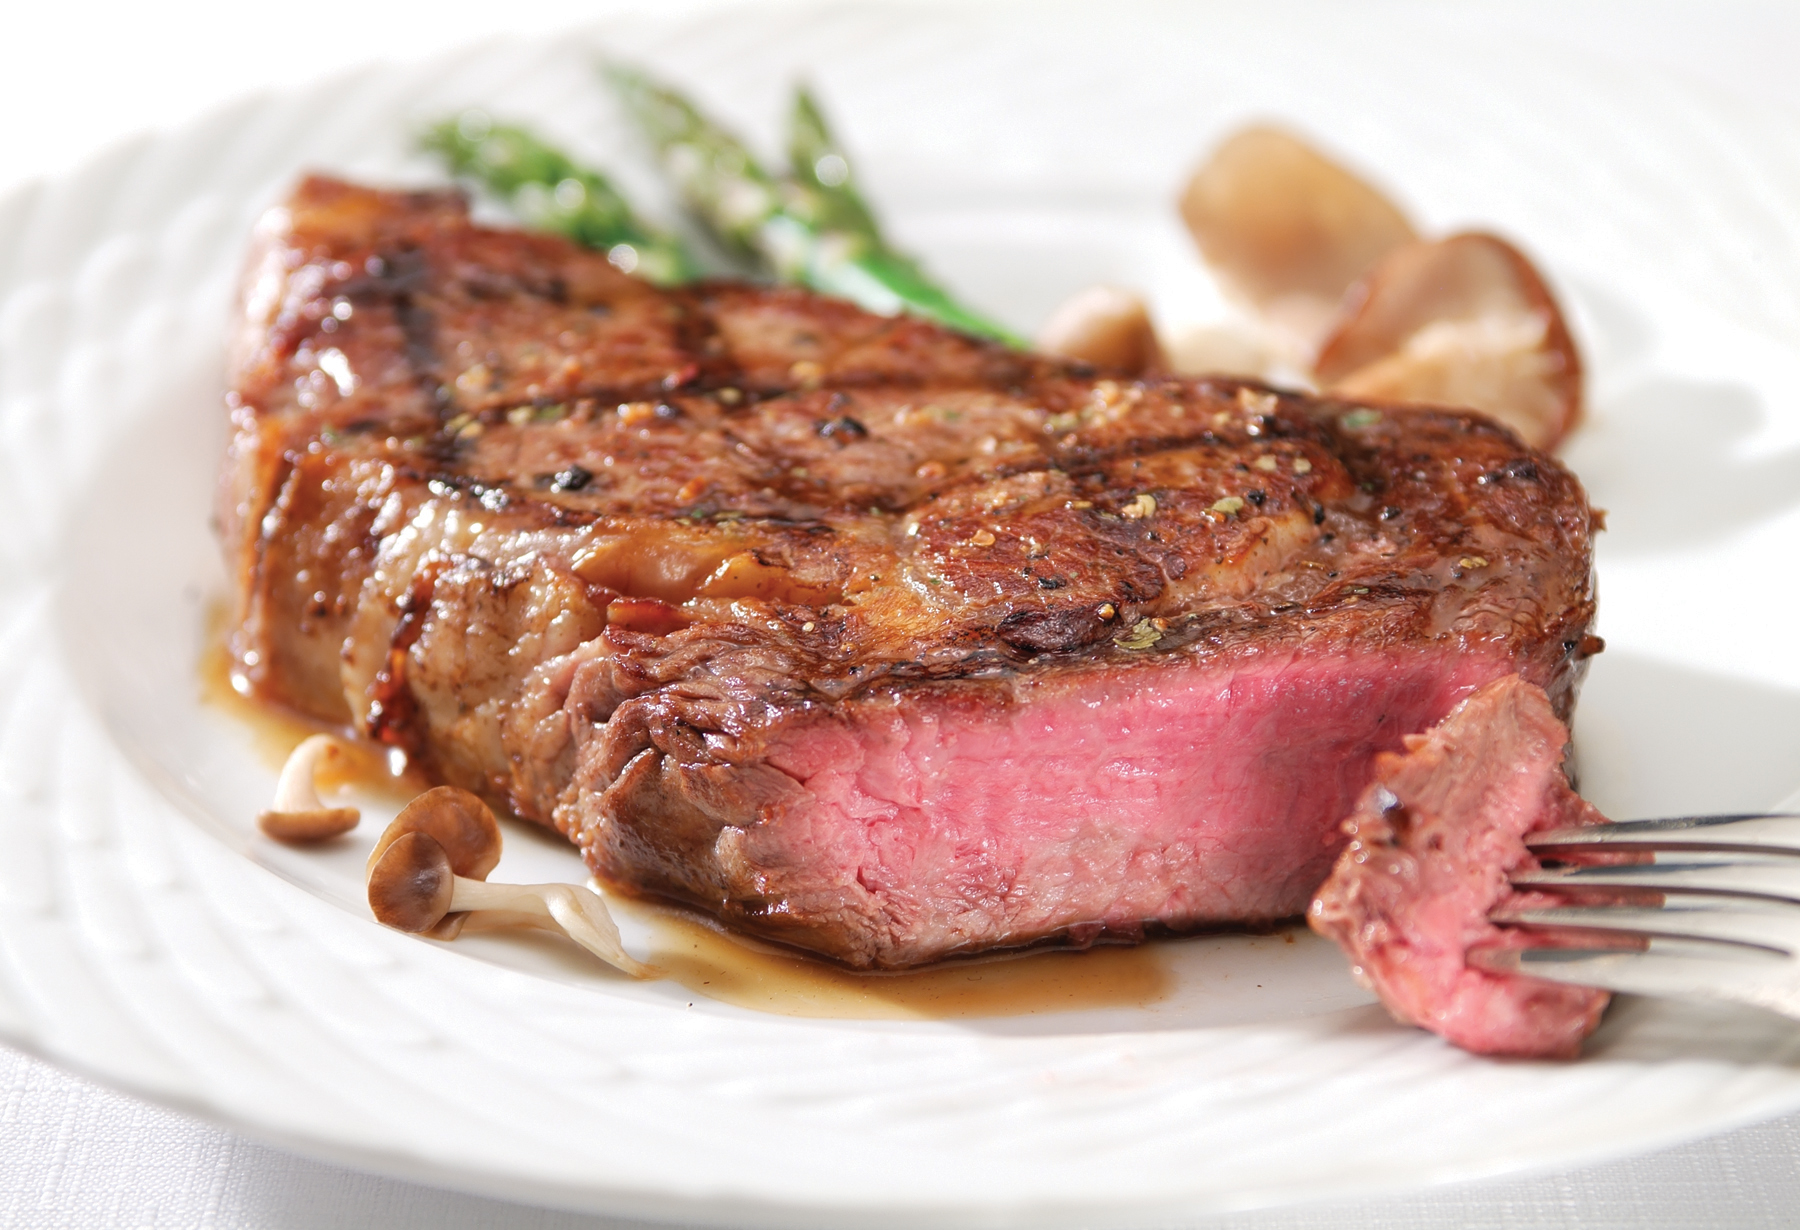 Steak Meaning and Definition